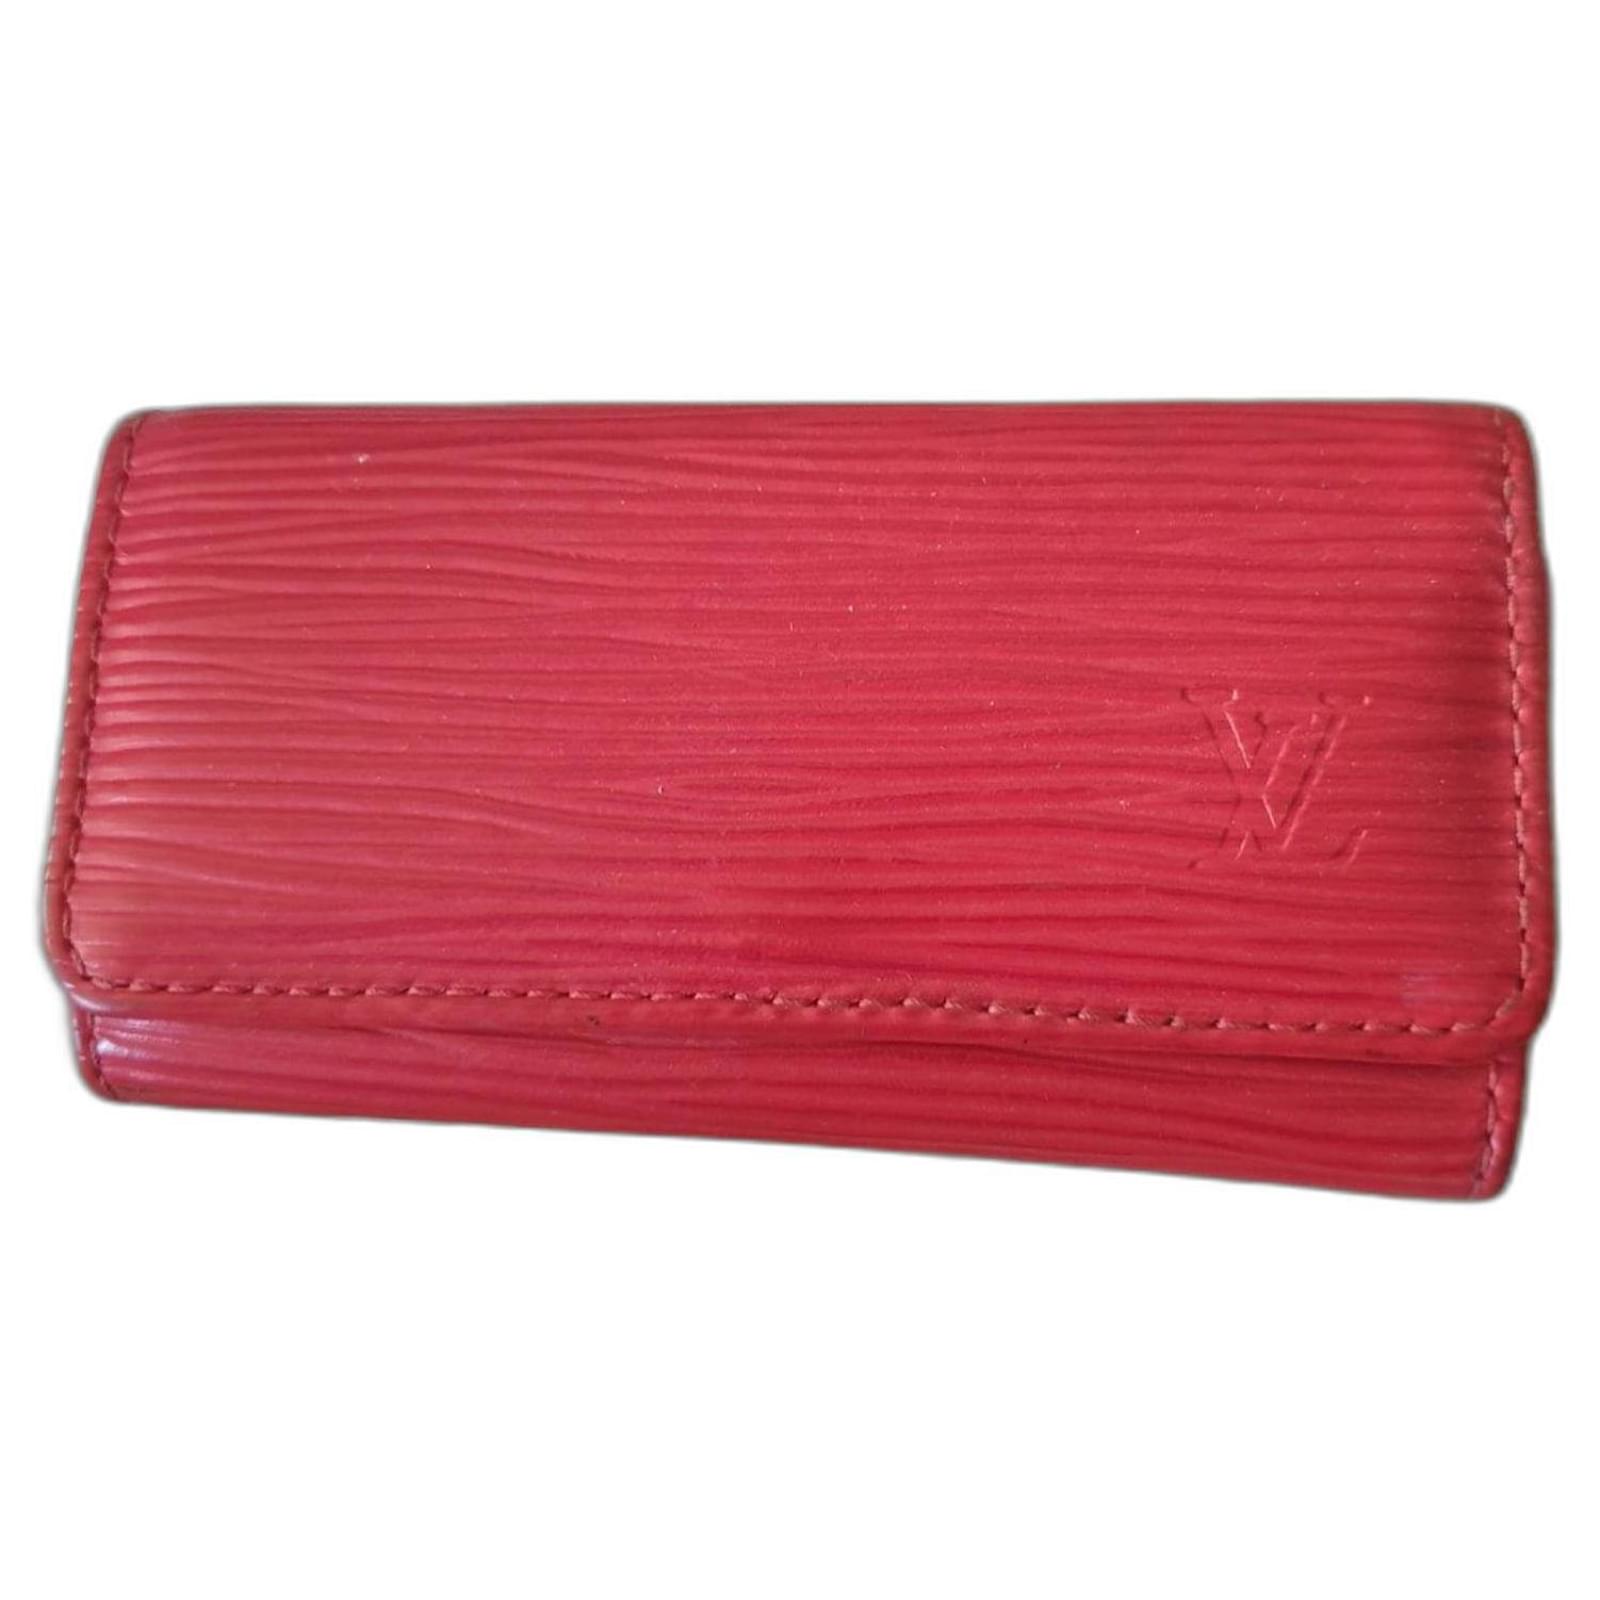 Louis Vuitton Red Epi Leather Monogram Six Ring Notebook Planner